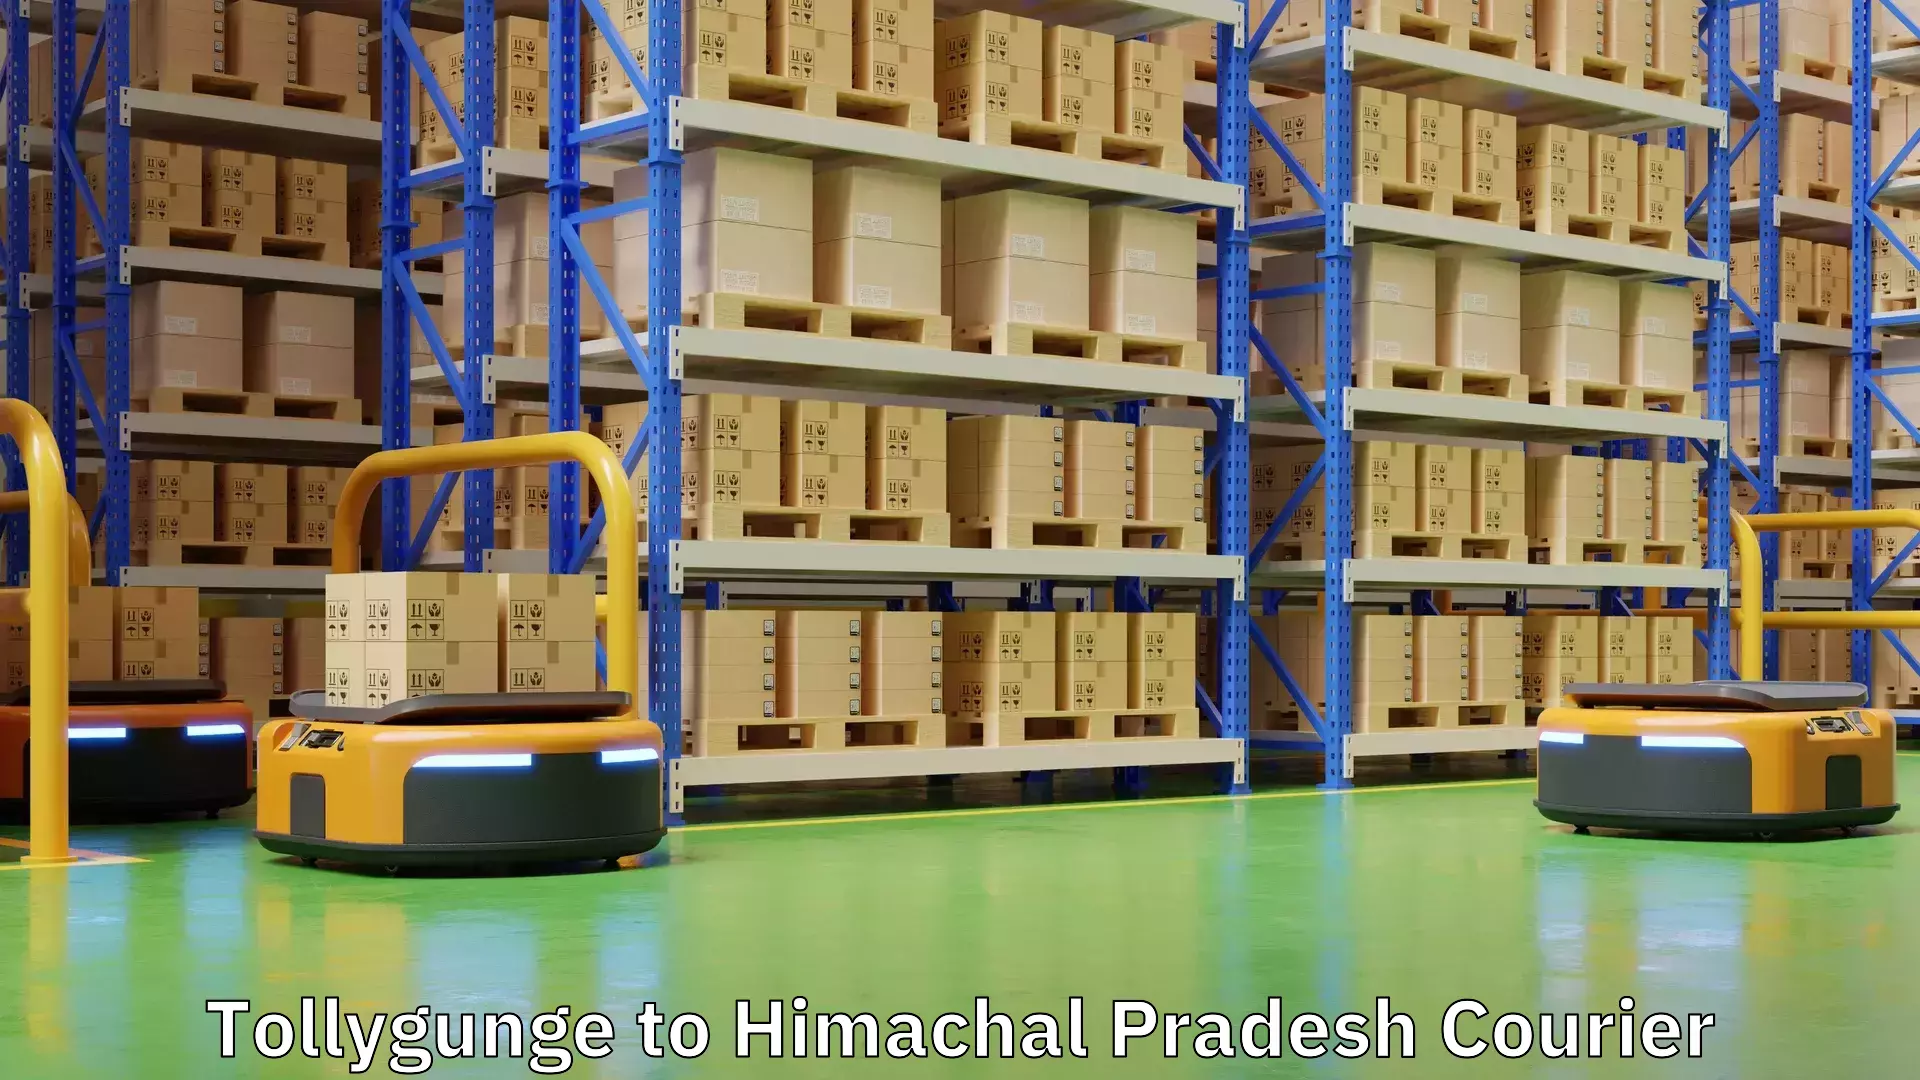 Parcel delivery automation in Tollygunge to Himachal Pradesh